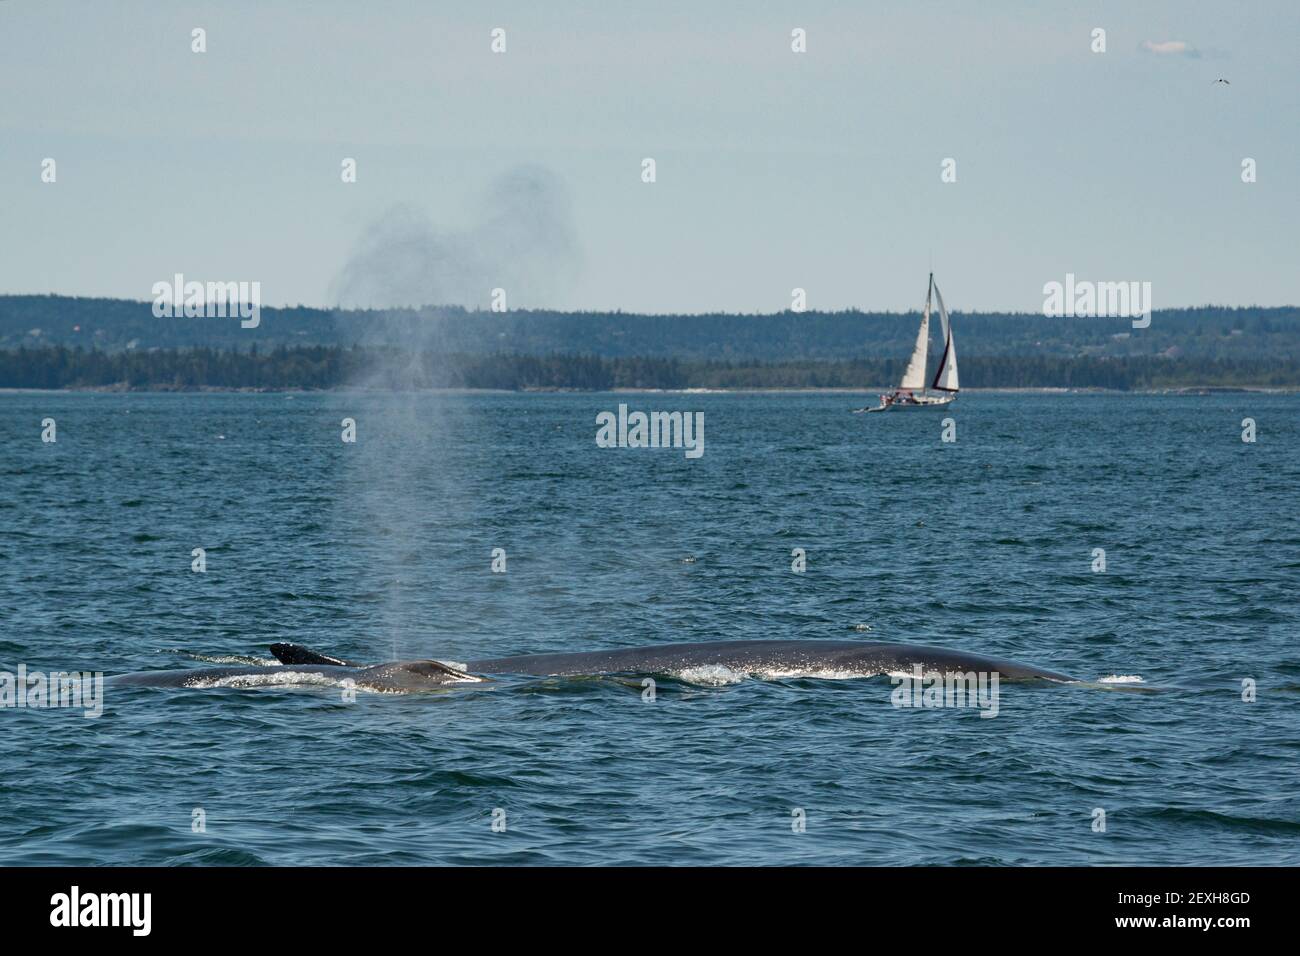 fin whales or finback whales, Balaenoptera physalus, blowing or spouting off Grand Manan Island, with sailboat in background, Bay of Fundy, NB, Canada Stock Photo